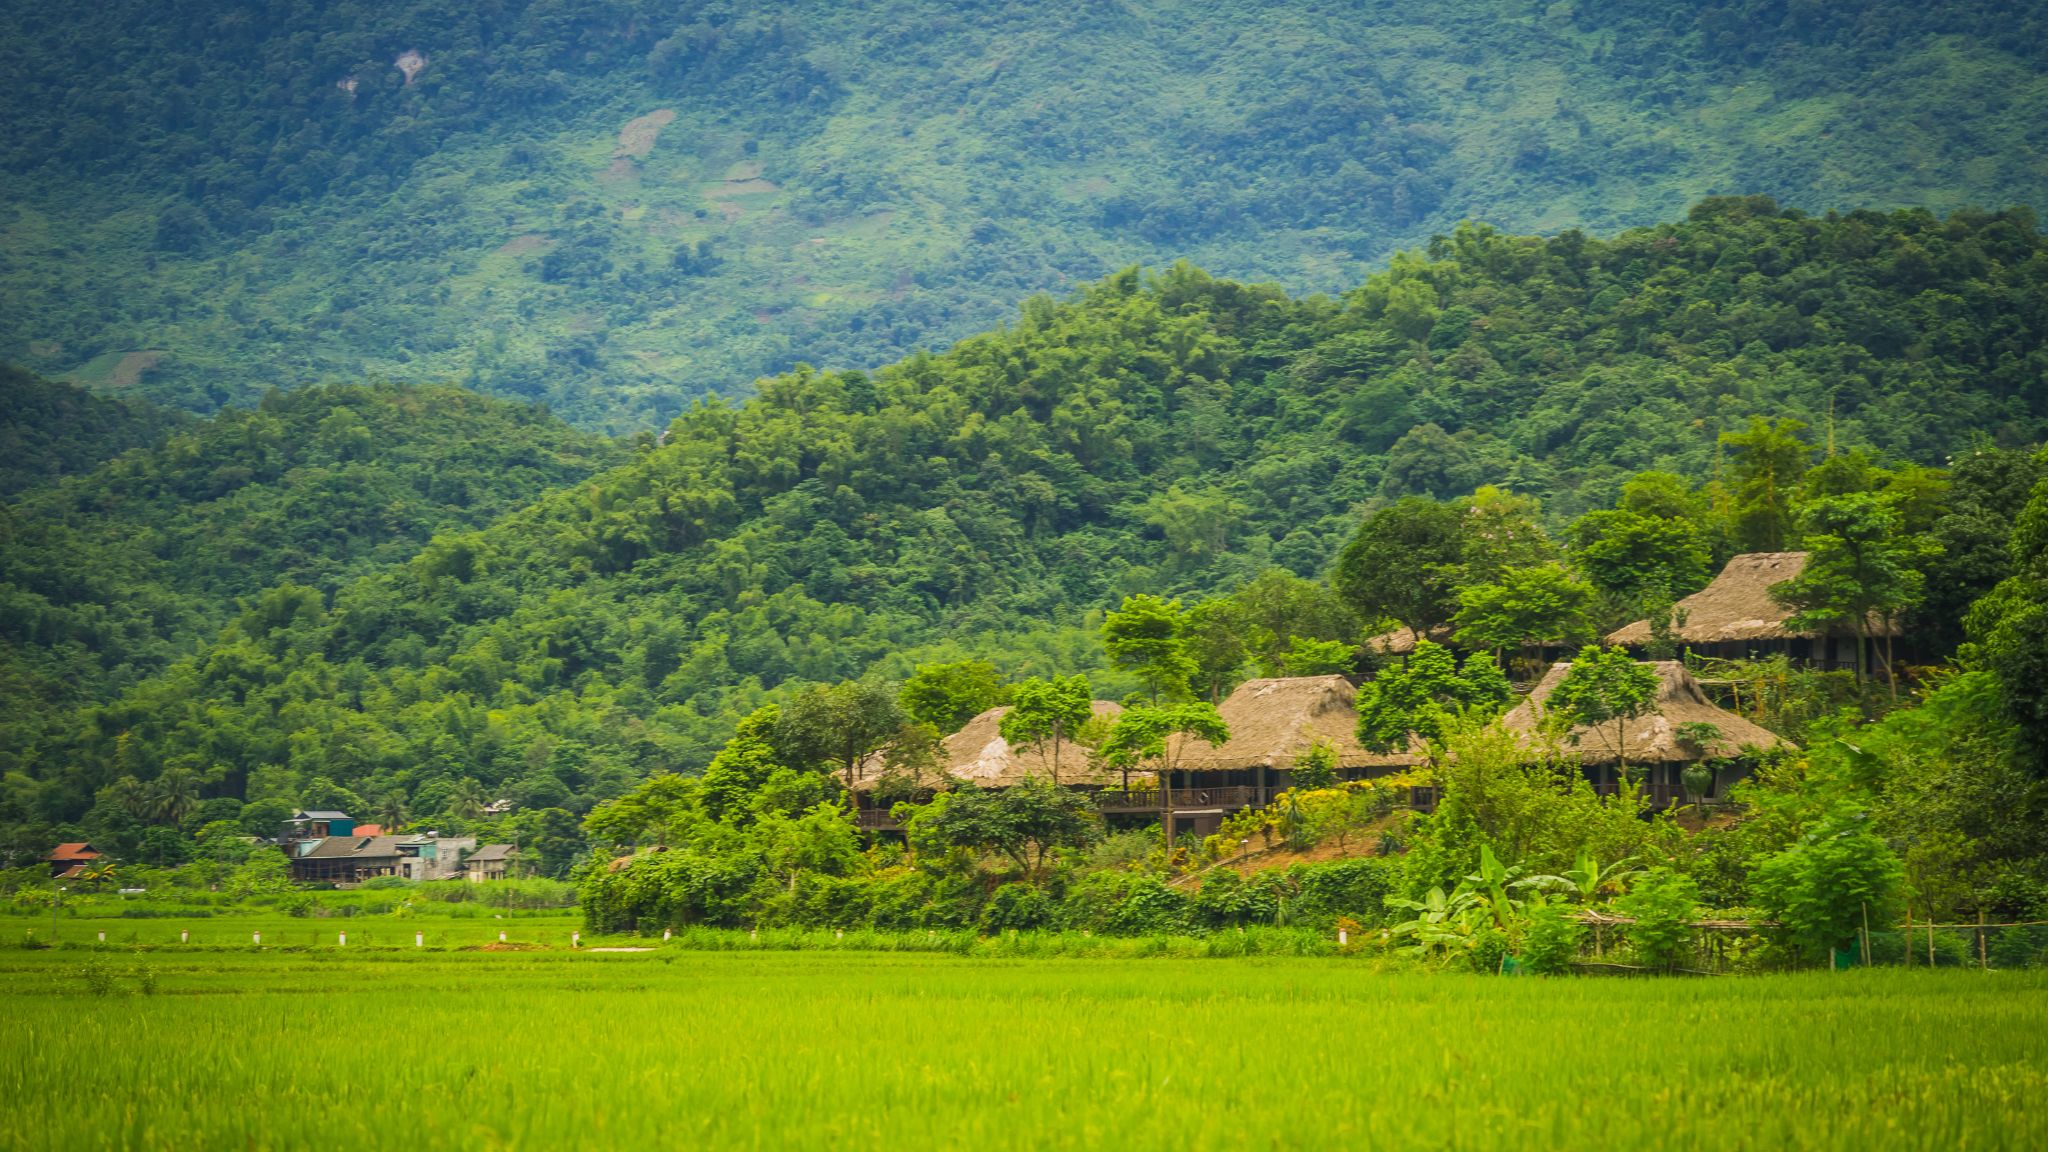 Day 3 Green Rice Field And Mountains In Mai Chau Valley